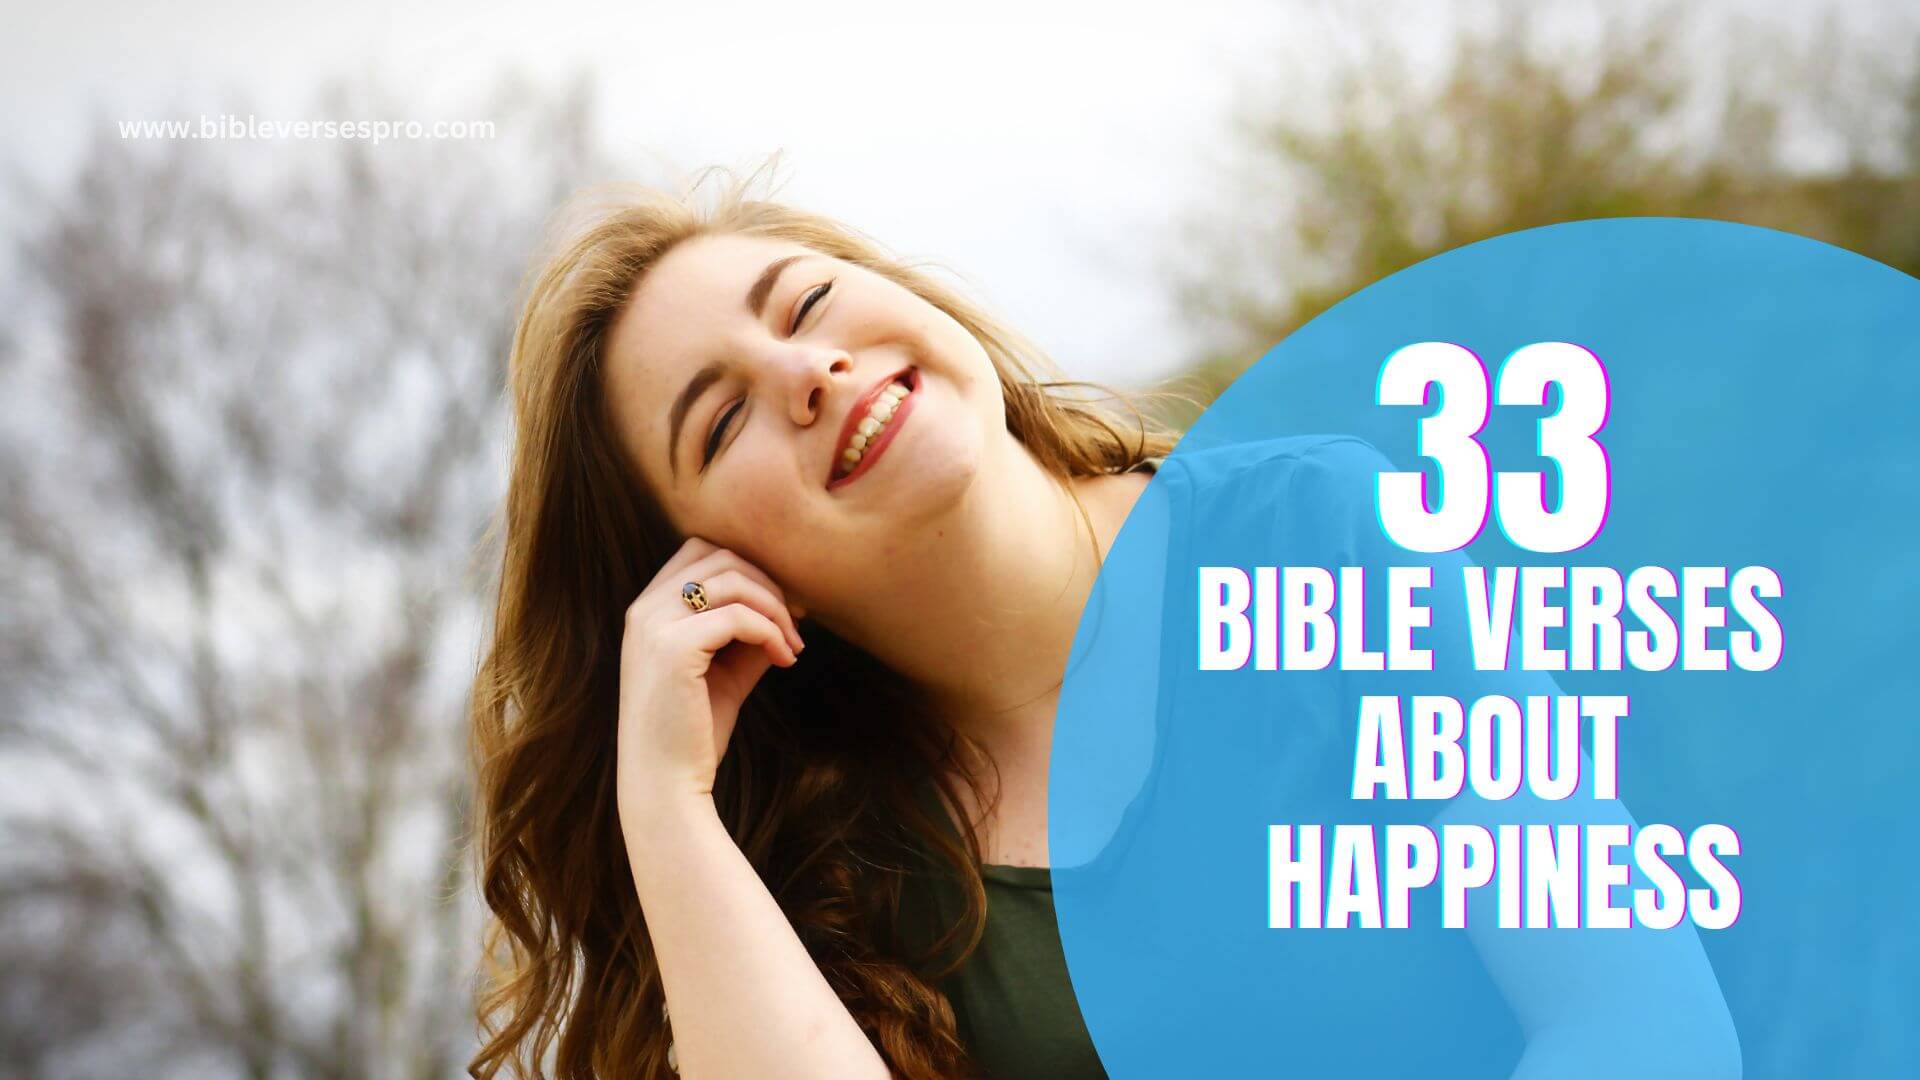 Bible Verses About Happiness